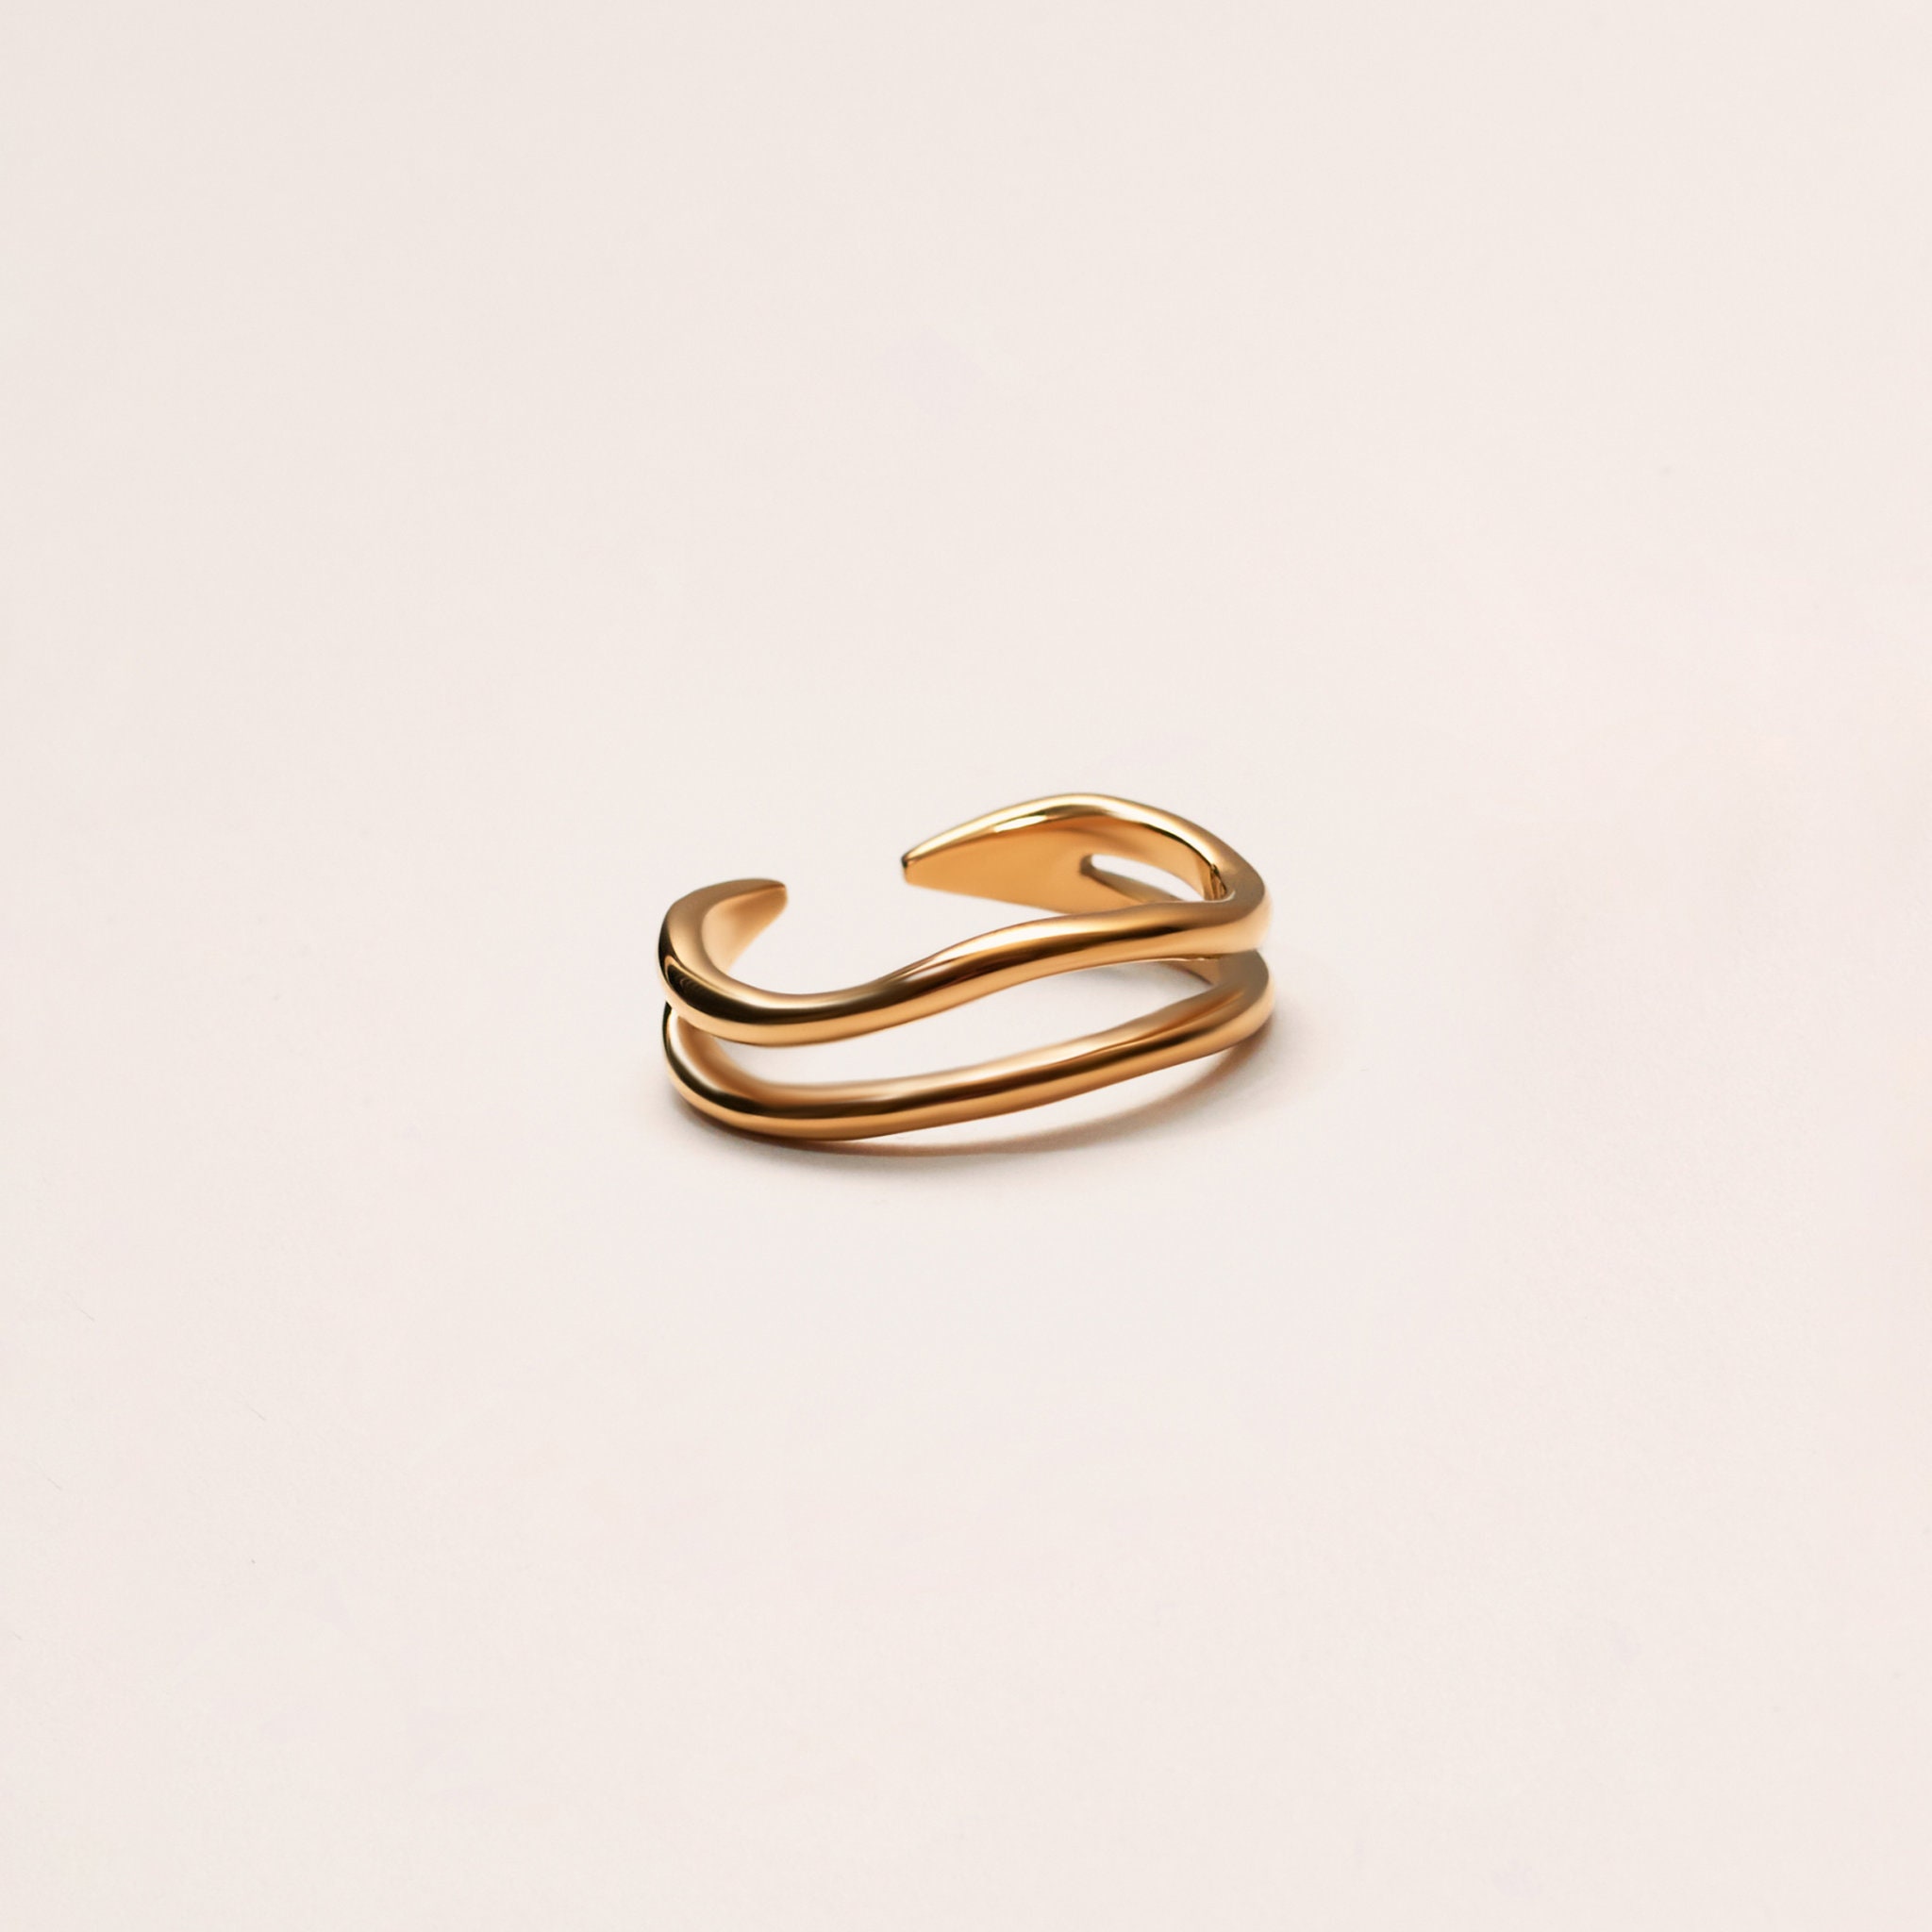 18K Gold Plated Double Band Ring - Adjustable Tarnish Free Dainty Statement Stacking Unique